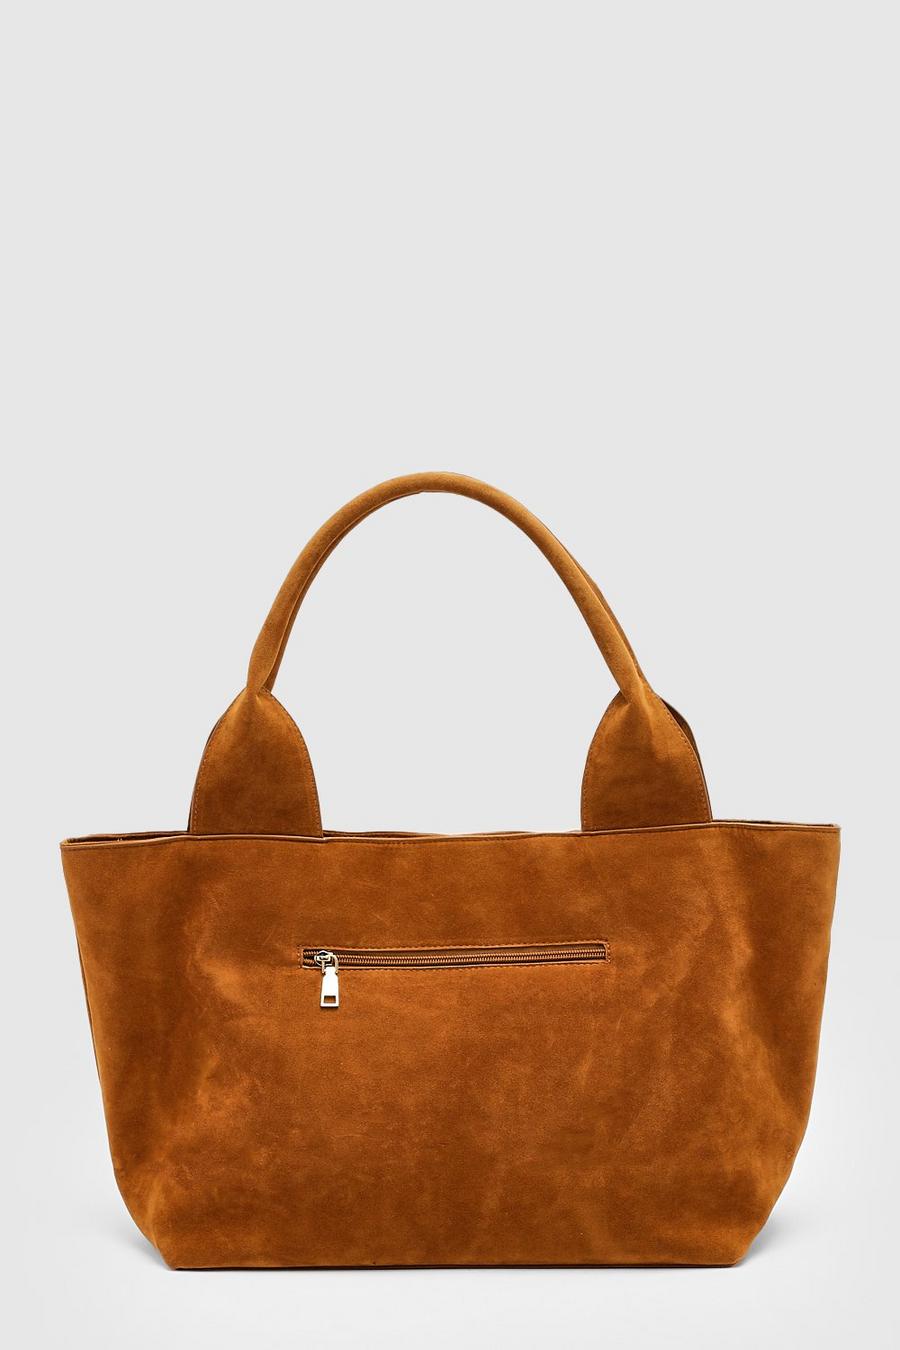 This Zara It Bag Is Really The Only Purse You Need This Summer